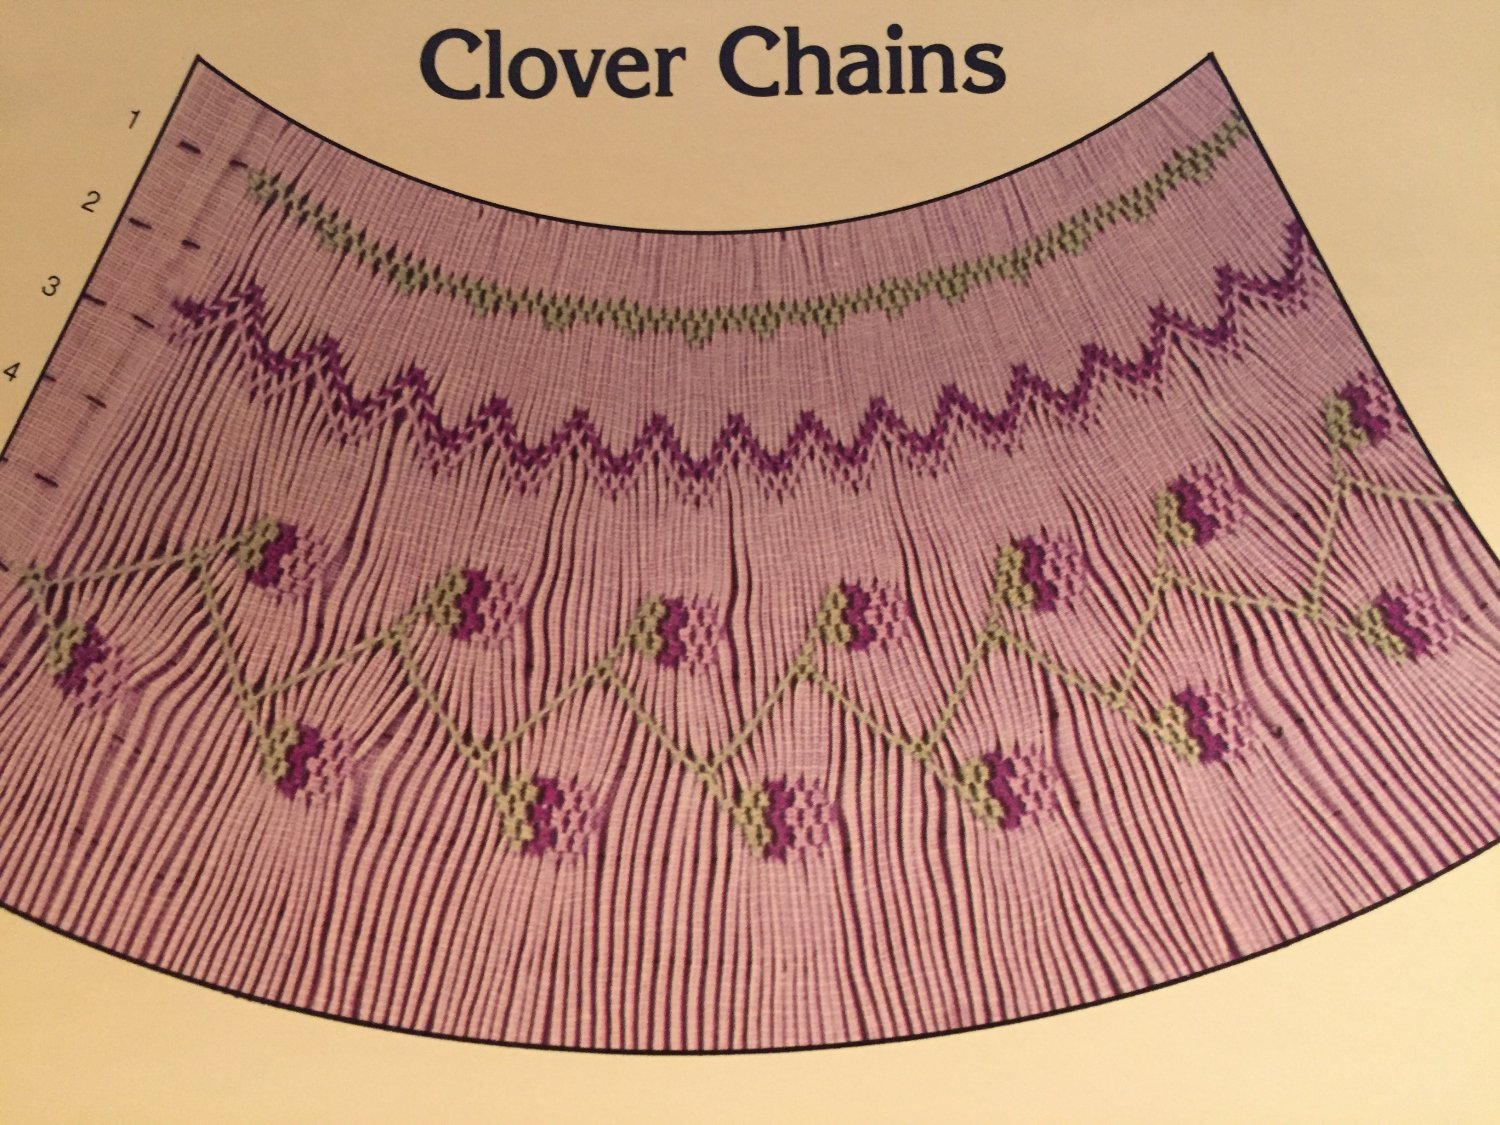 Clover Chains Smocking plate Mollie Jane Taylor